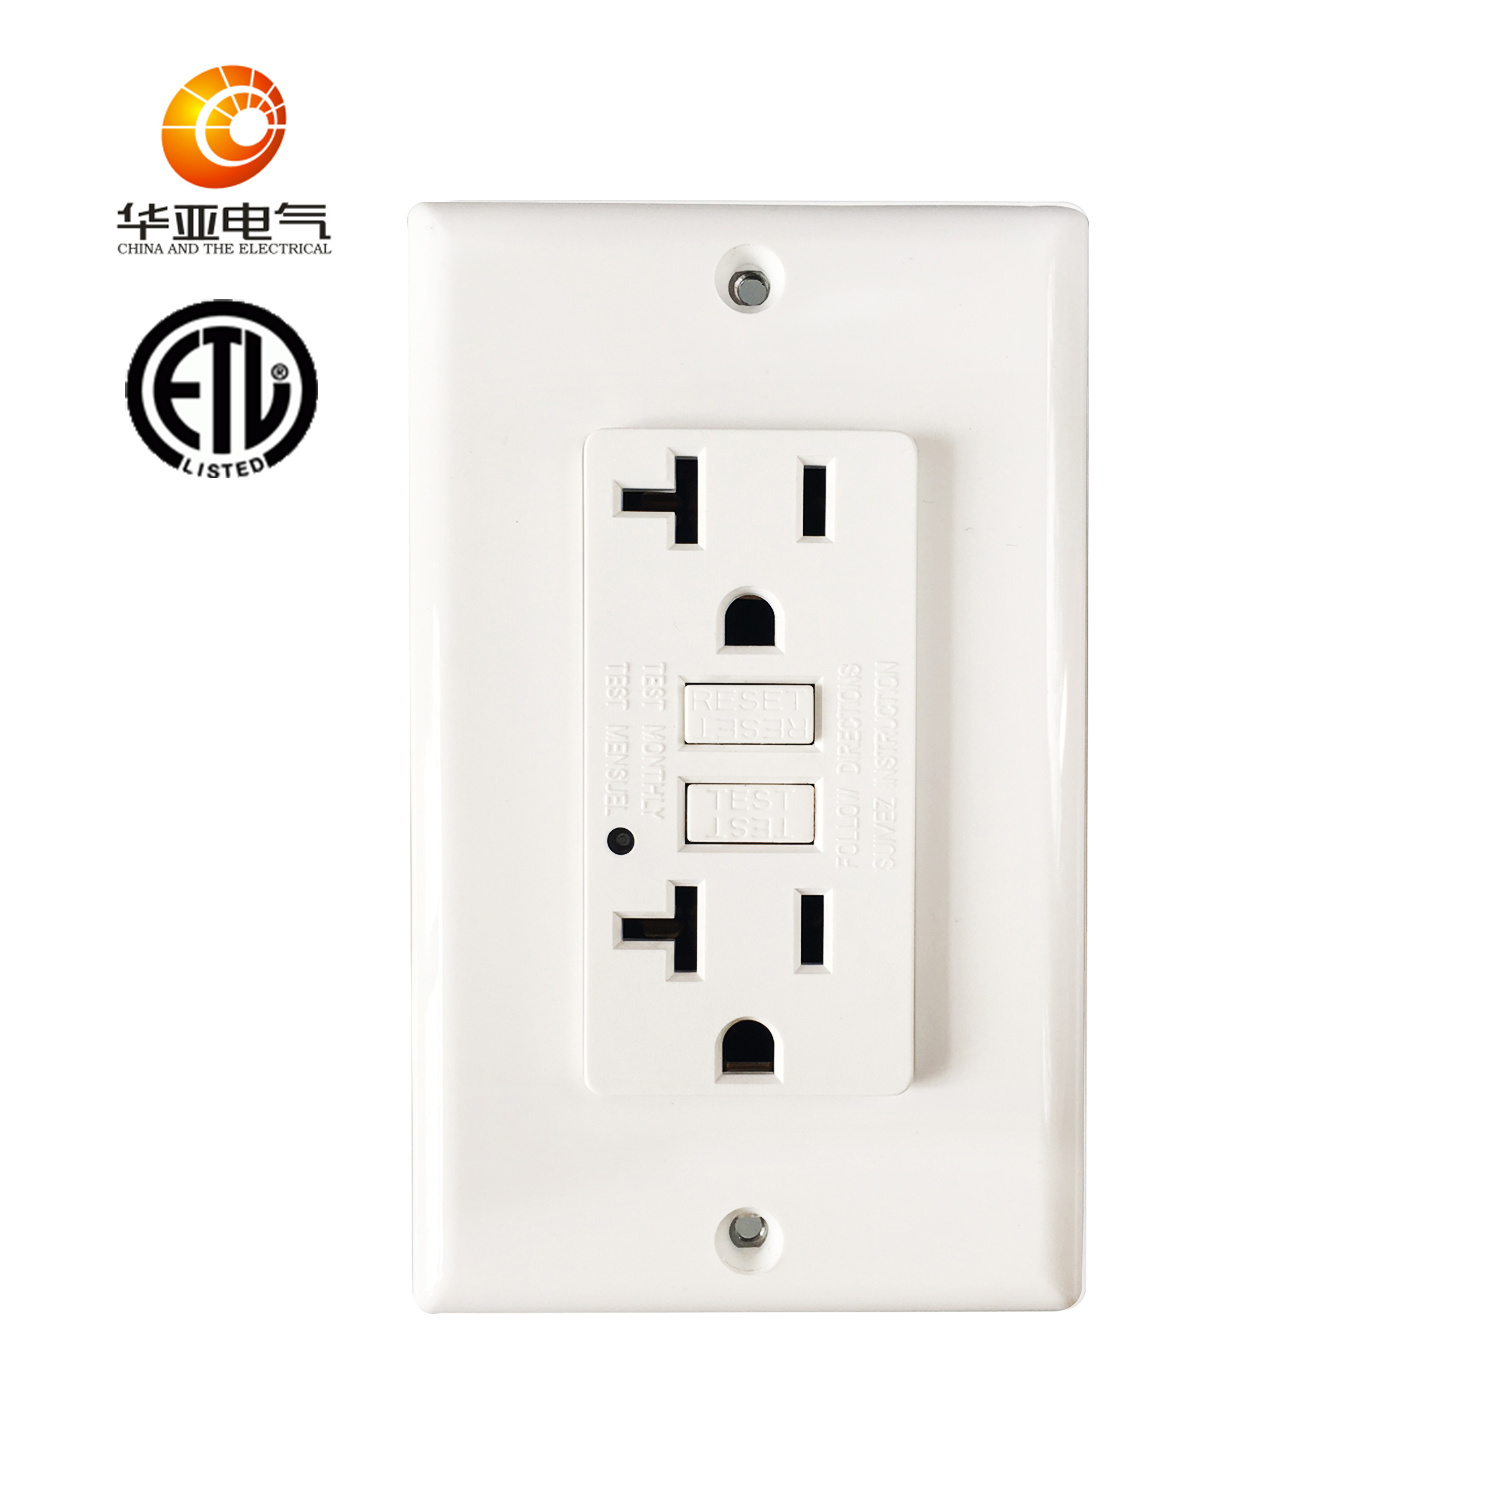 Huaya American High Quality 20A, 125V Without Tamper Resistant and Weather Resistant GFCI Socket with LED Light Indicator, GFCI Outlet, ETL Listed, White